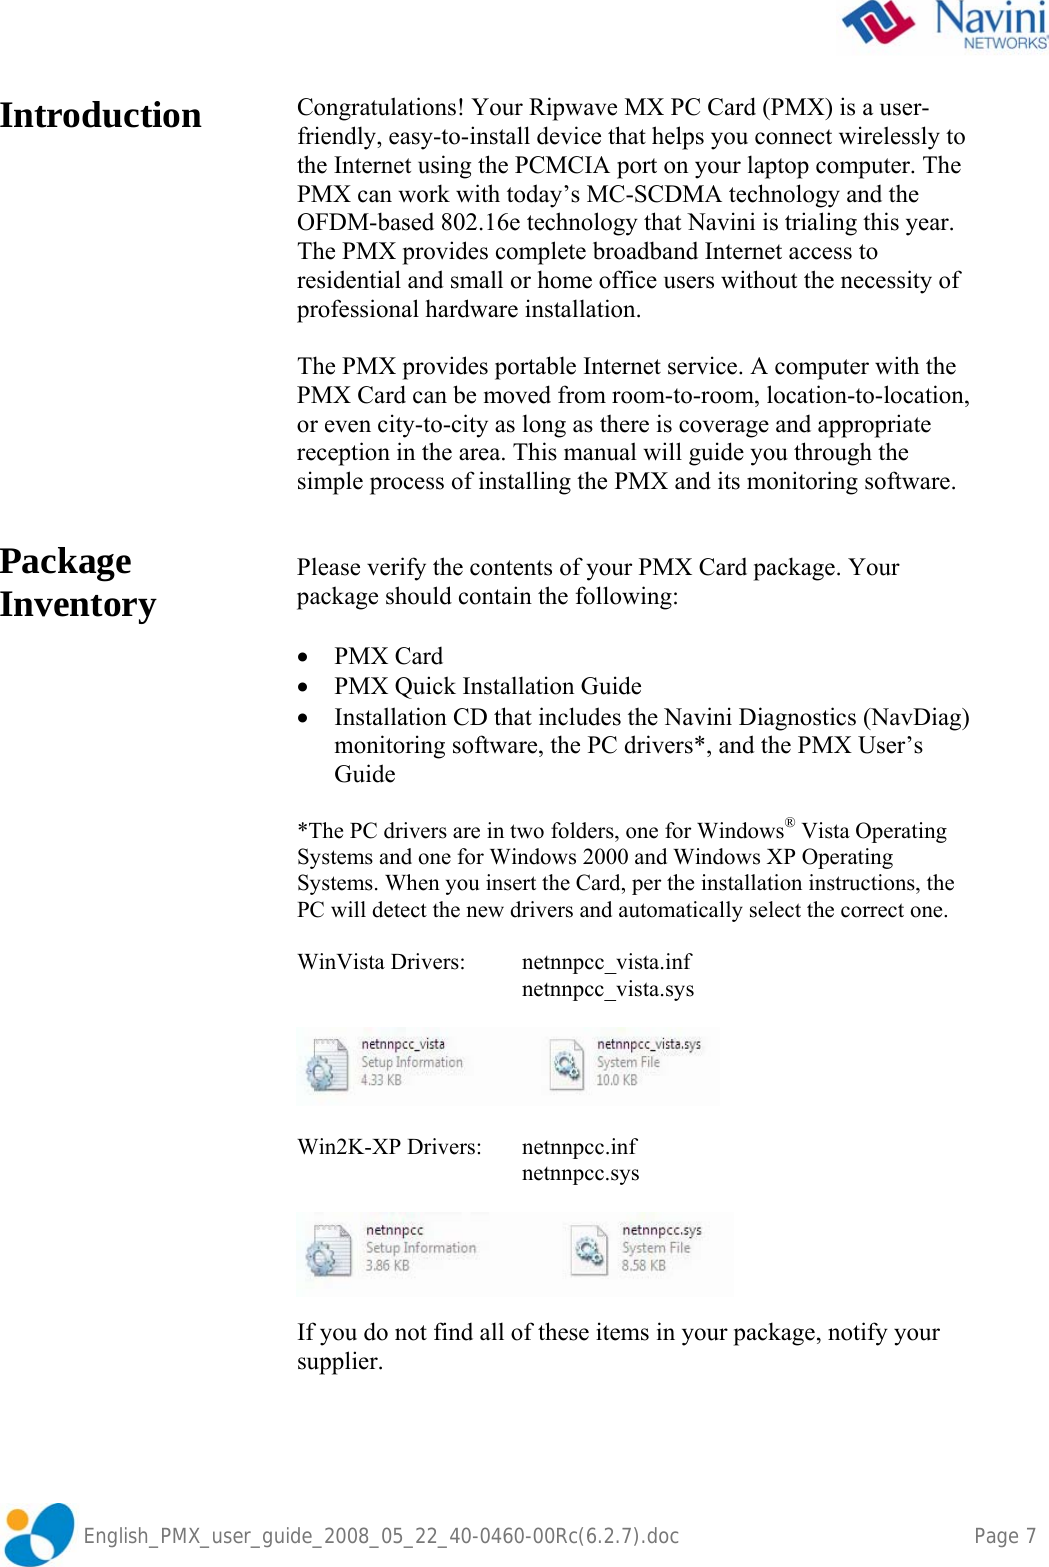               English_PMX_user_guide_2008_05_22_40-0460-00Rc(6.2.7).doc    Page 7 Introduction               Package Inventory                     Congratulations! Your Ripwave MX PC Card (PMX) is a user-friendly, easy-to-install device that helps you connect wirelessly to the Internet using the PCMCIA port on your laptop computer. The PMX can work with today’s MC-SCDMA technology and the OFDM-based 802.16e technology that Navini is trialing this year. The PMX provides complete broadband Internet access to residential and small or home office users without the necessity of professional hardware installation.   The PMX provides portable Internet service. A computer with the PMX Card can be moved from room-to-room, location-to-location, or even city-to-city as long as there is coverage and appropriate reception in the area. This manual will guide you through the simple process of installing the PMX and its monitoring software.   Please verify the contents of your PMX Card package. Your package should contain the following:   • PMX Card • PMX Quick Installation Guide • Installation CD that includes the Navini Diagnostics (NavDiag) monitoring software, the PC drivers*, and the PMX User’s Guide  *The PC drivers are in two folders, one for Windows® Vista Operating Systems and one for Windows 2000 and Windows XP Operating Systems. When you insert the Card, per the installation instructions, the PC will detect the new drivers and automatically select the correct one.  WinVista Drivers:  netnnpcc_vista.inf    netnnpcc_vista.sys      Win2K-XP Drivers:  netnnpcc.inf    netnnpcc.sys      If you do not find all of these items in your package, notify your supplier.     